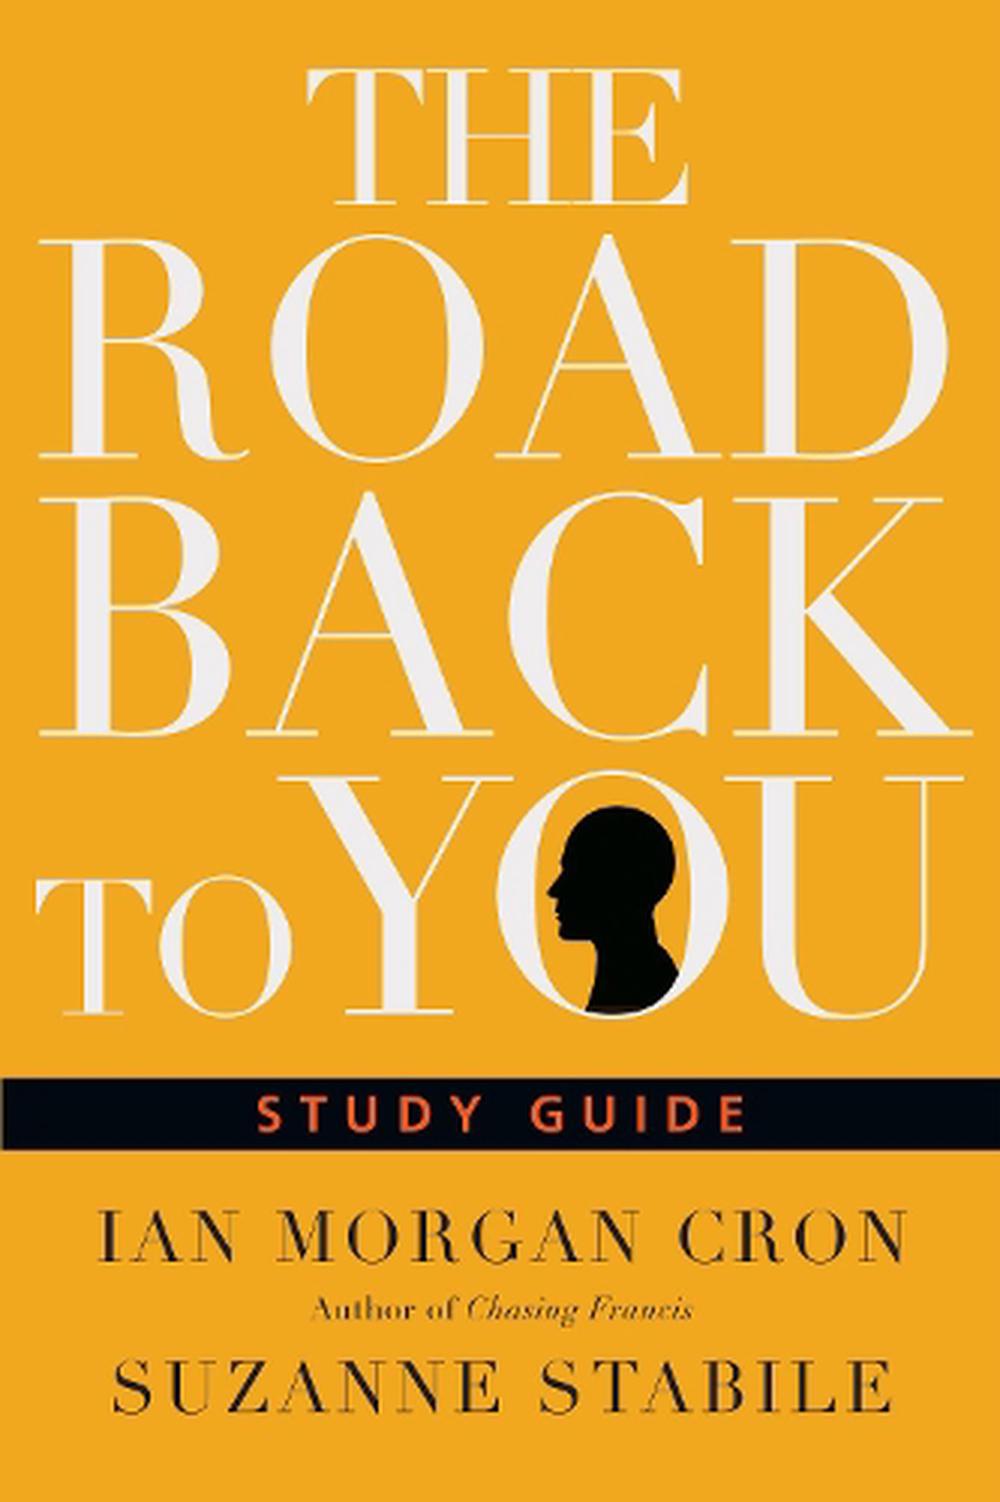 The Road Back to You by Ian Morgan Cron